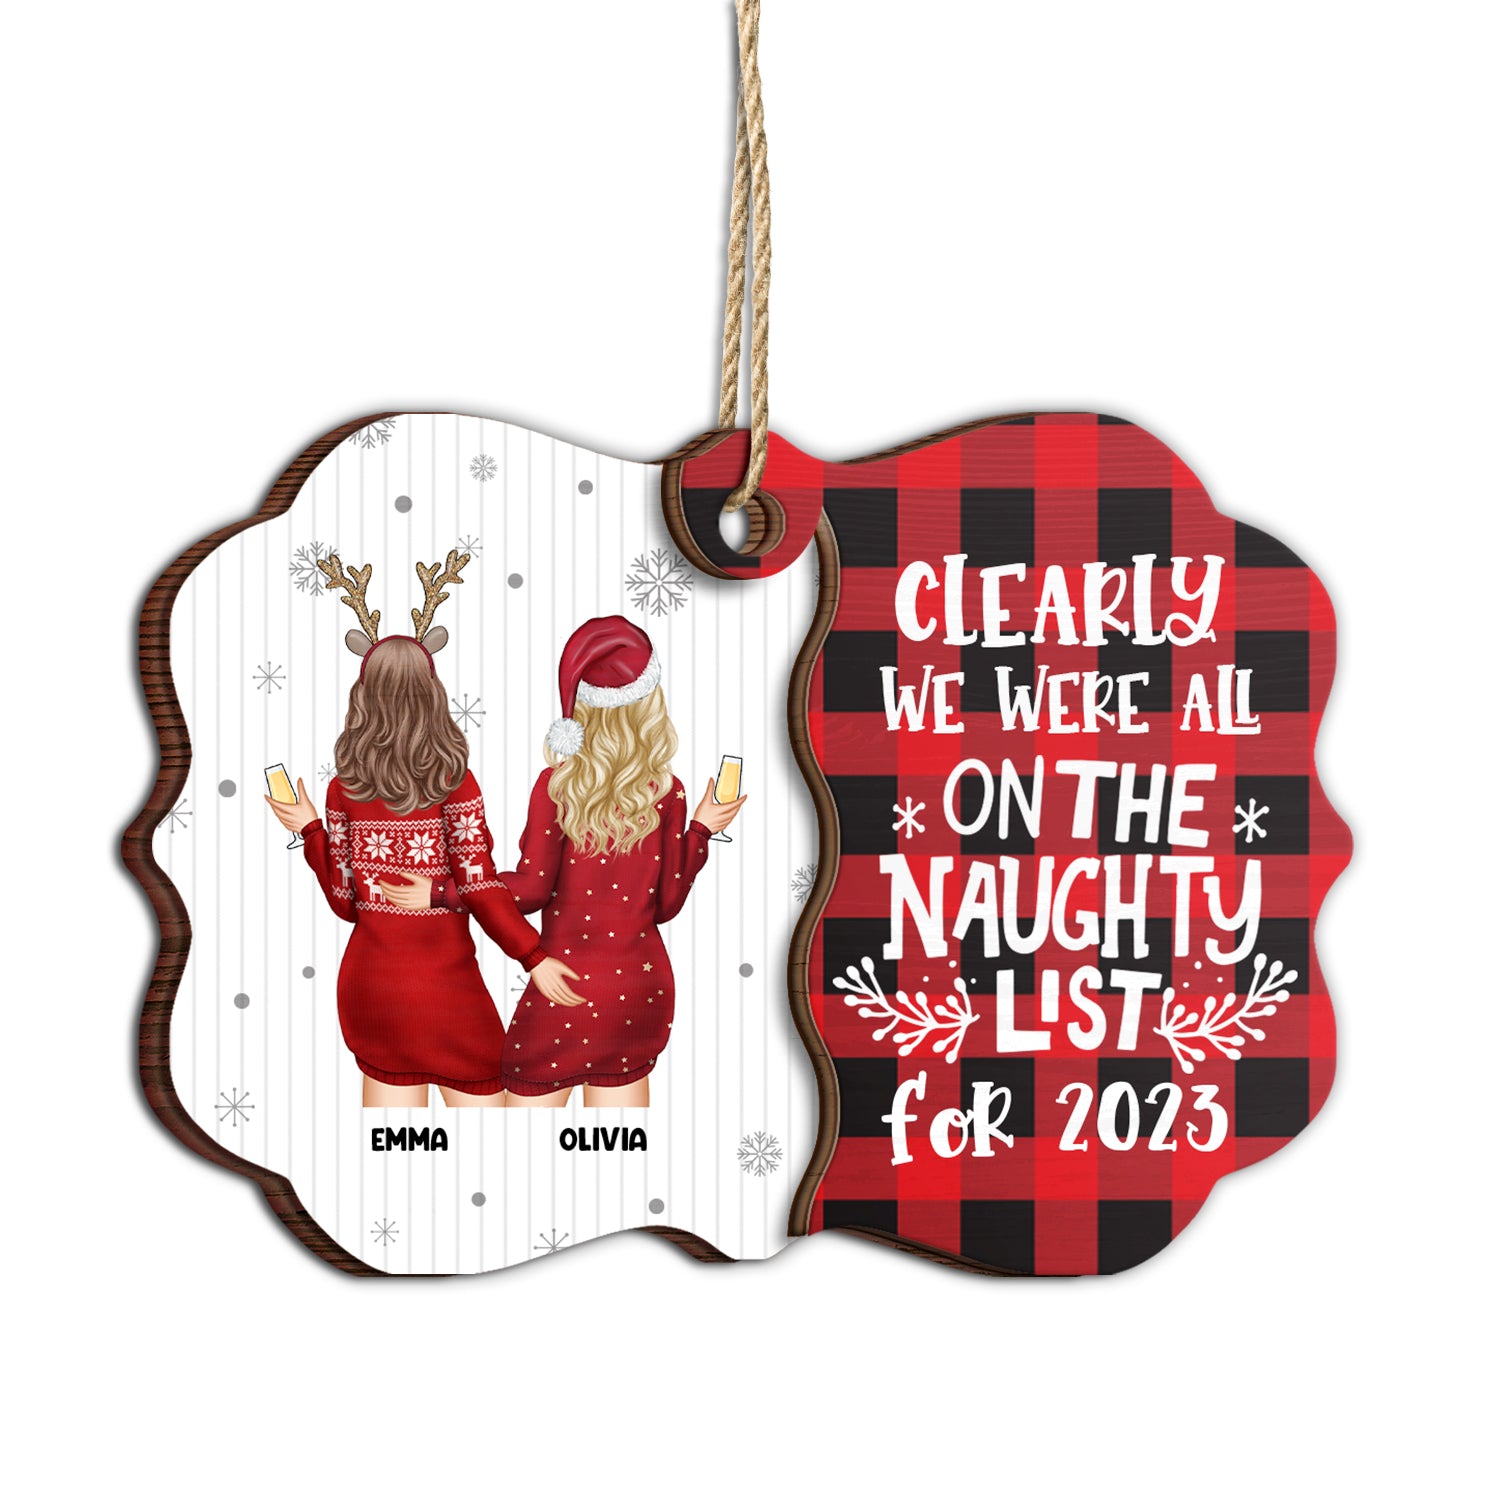 On The Naughty List - Christmas Gift For Besties - Personalized 2-Layered Wooden Ornament